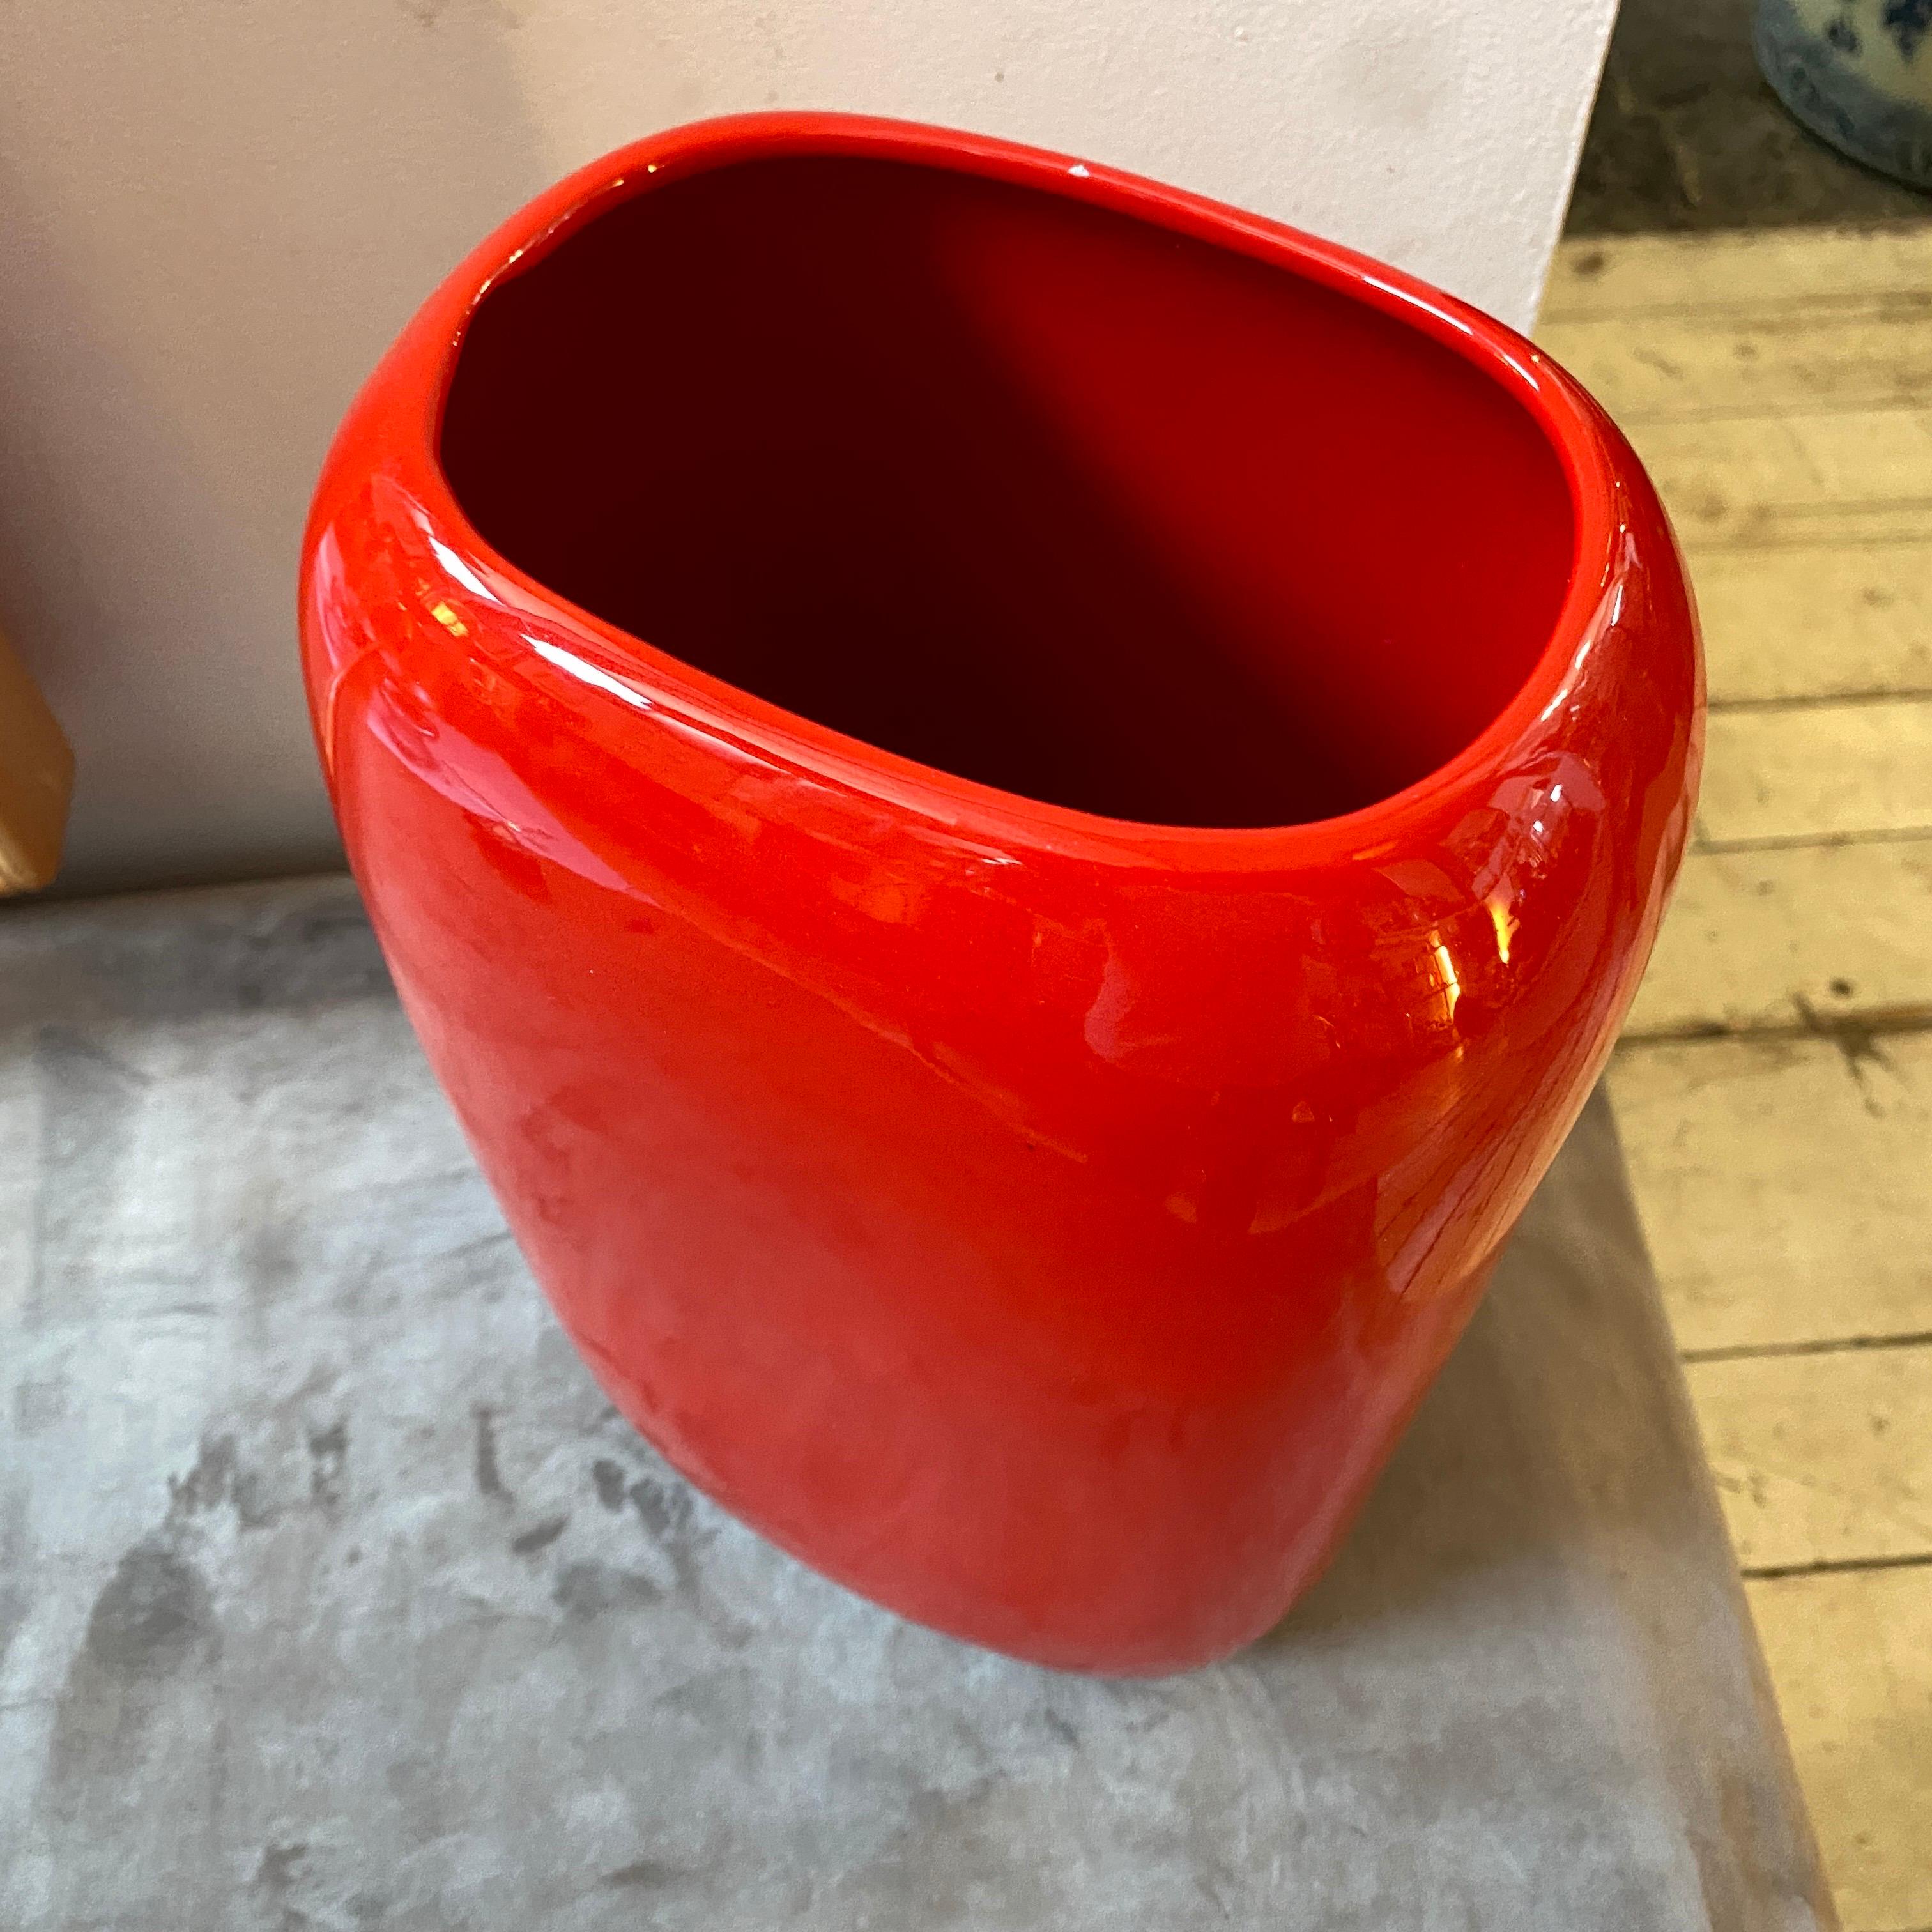 A red ceramic vase made in Italy in the Seventies by Vittorio Fulgenzi, in that period it was very popular this kind of ceramic called vetrochina. It's labeled on a side Vittorio Fulgenzi.